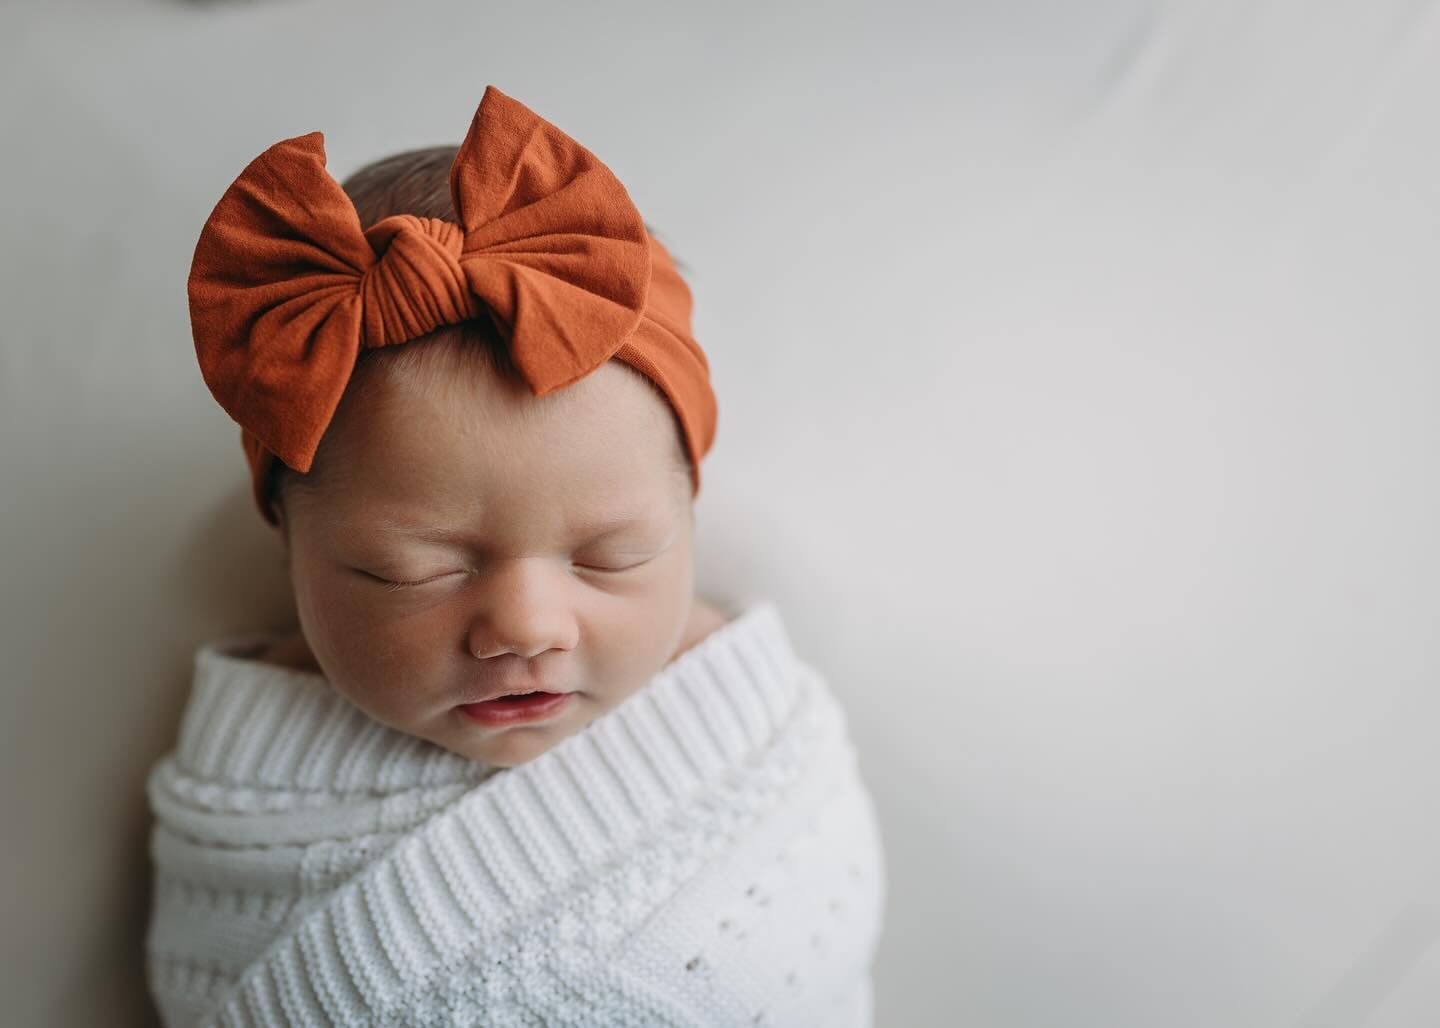 Simple but sweet. .
.
.
#Expressionsbyaimee #expressionsbyaimeenewbornphotography #idahofallsphotographer #idahofallsnewbornphotographer #rexburgphotographer #rexburgnewbornphotographer #pocatellophotographer #pocatellonewbornphotographer #blackfootp